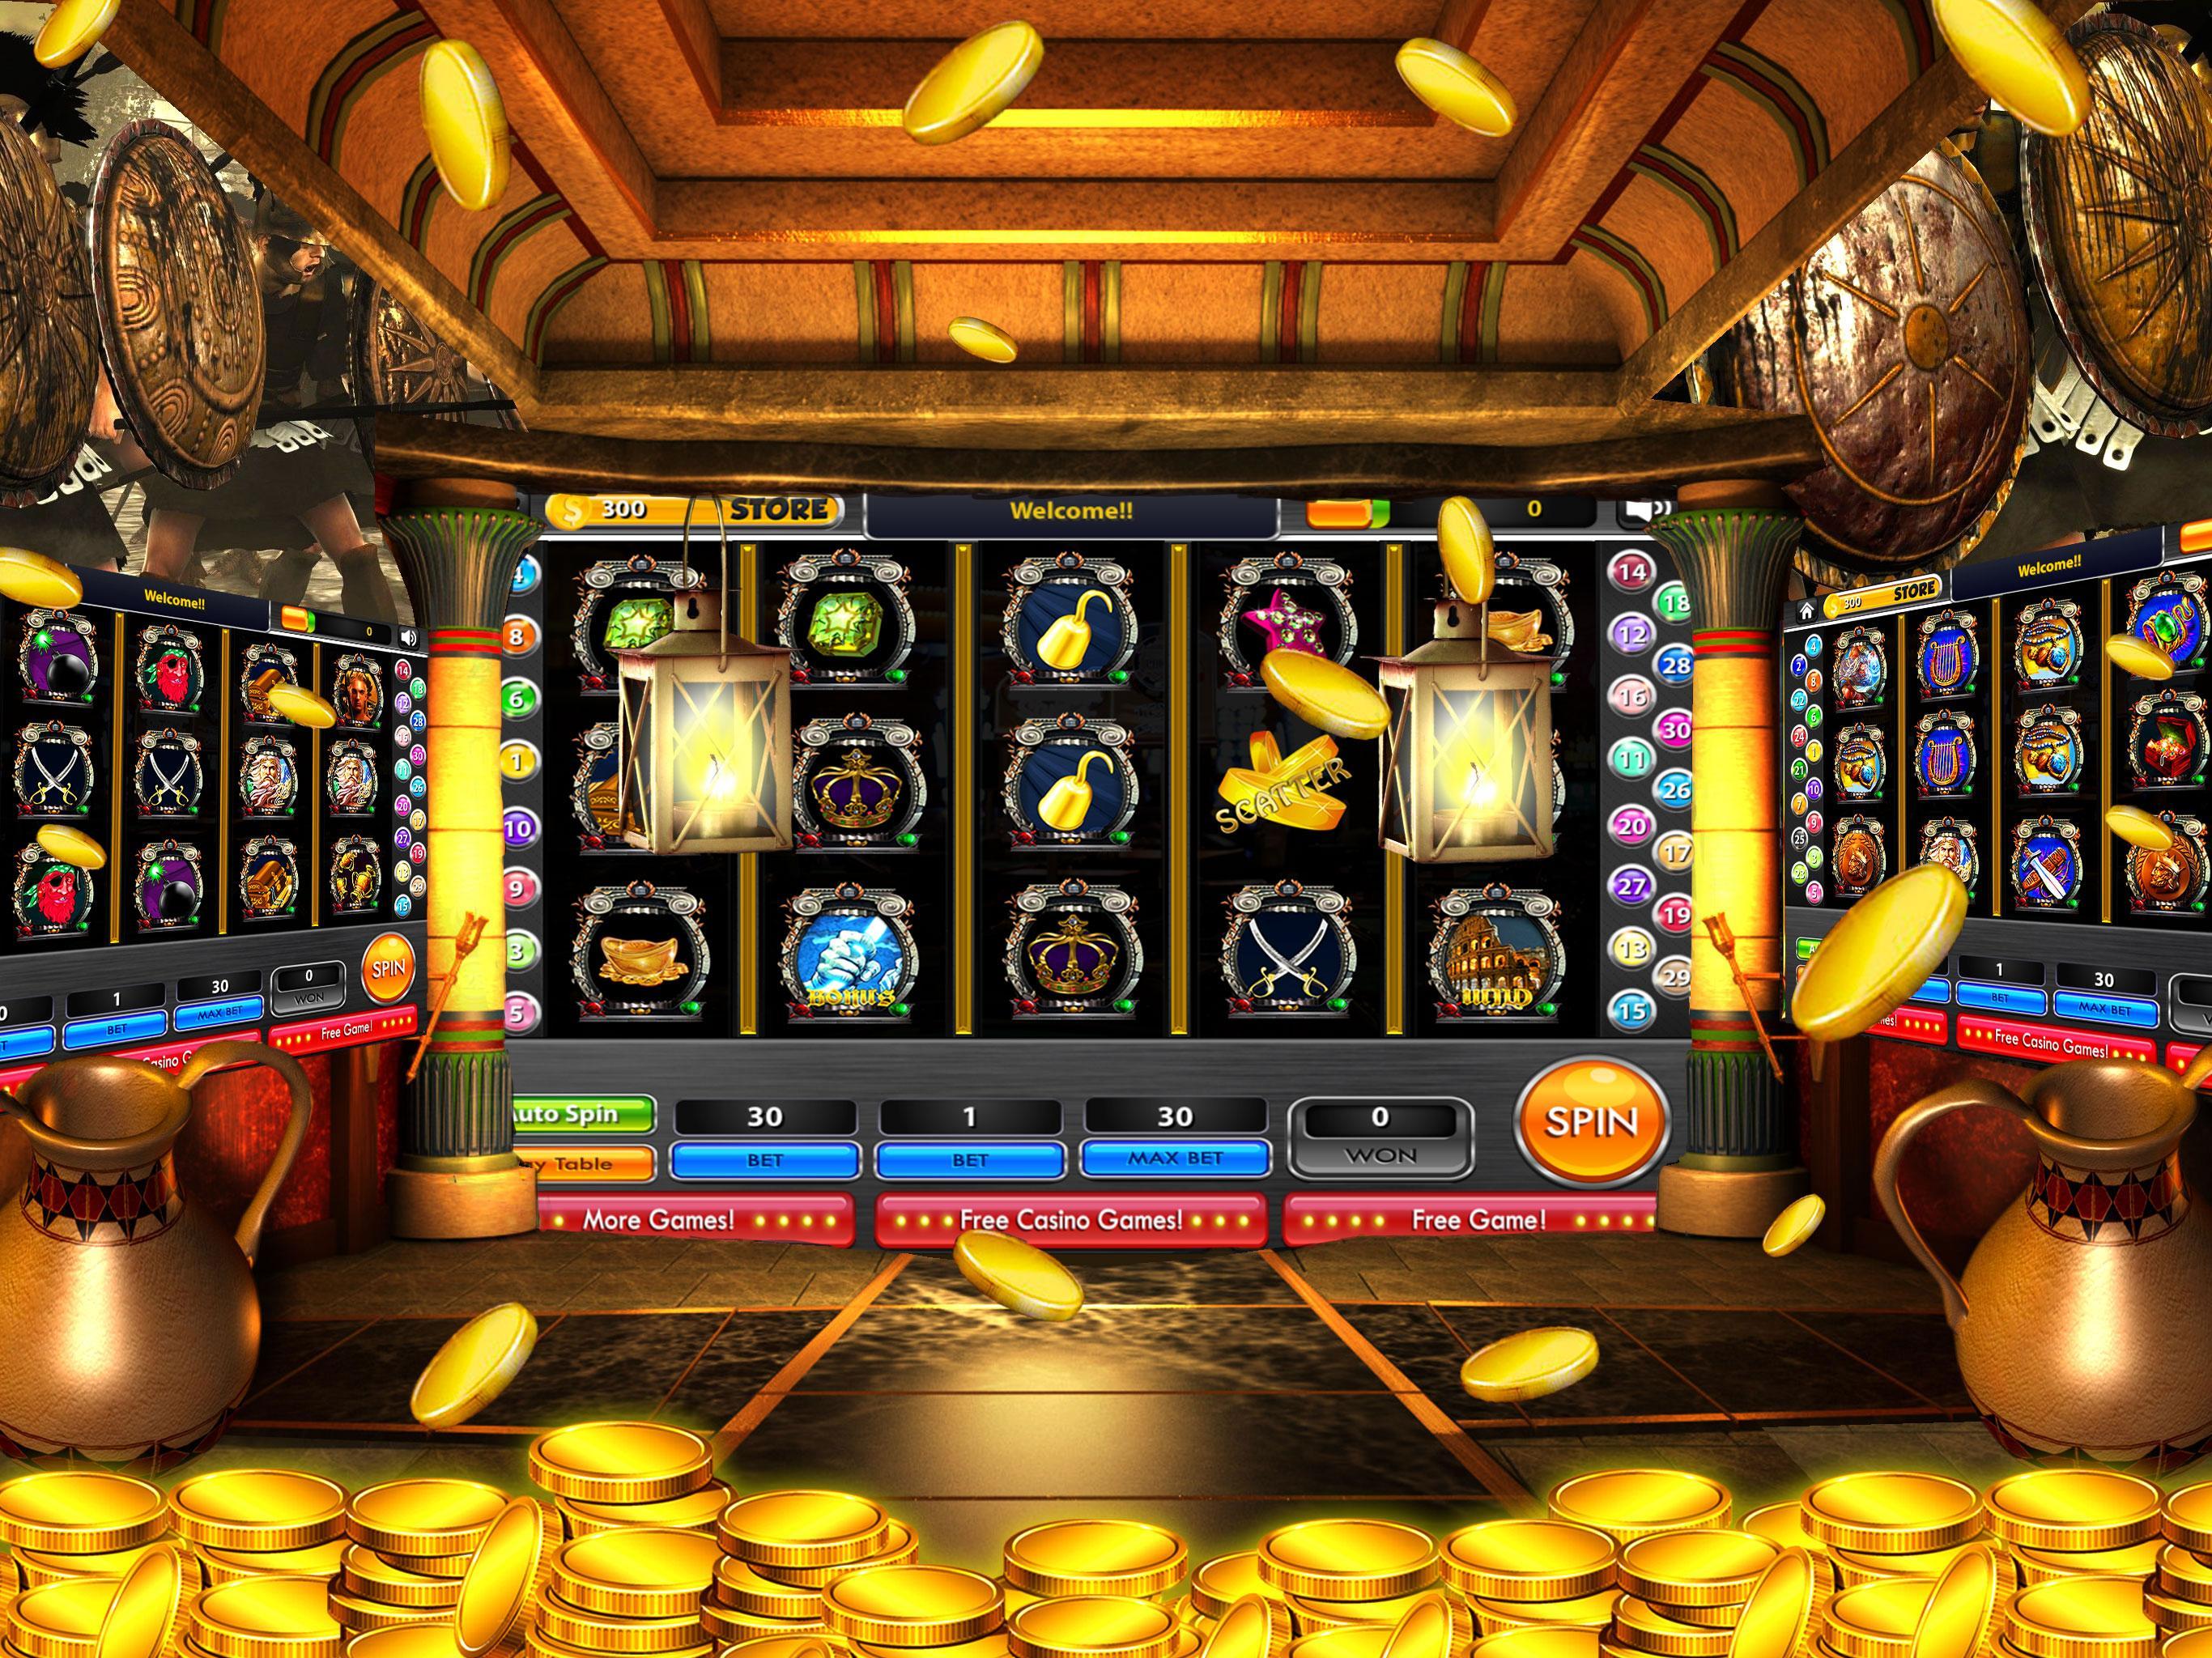 Champion slots casino for Android - APK Download